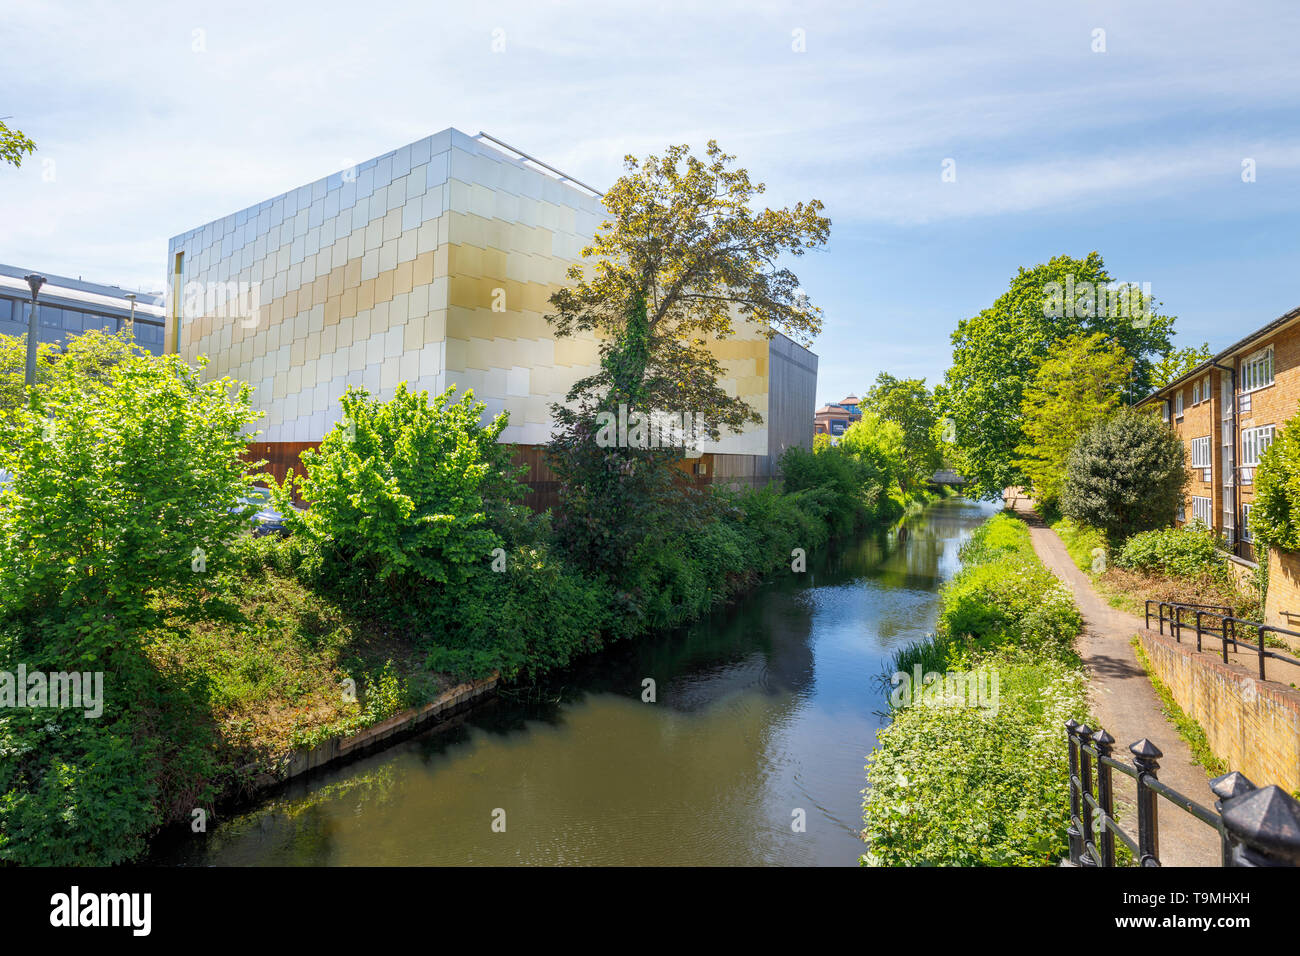 The Lightbox in Woking town centre, a gallery, museum and exhibition space civic amenity modern building on the banks of the Basingstoke Canal Stock Photo